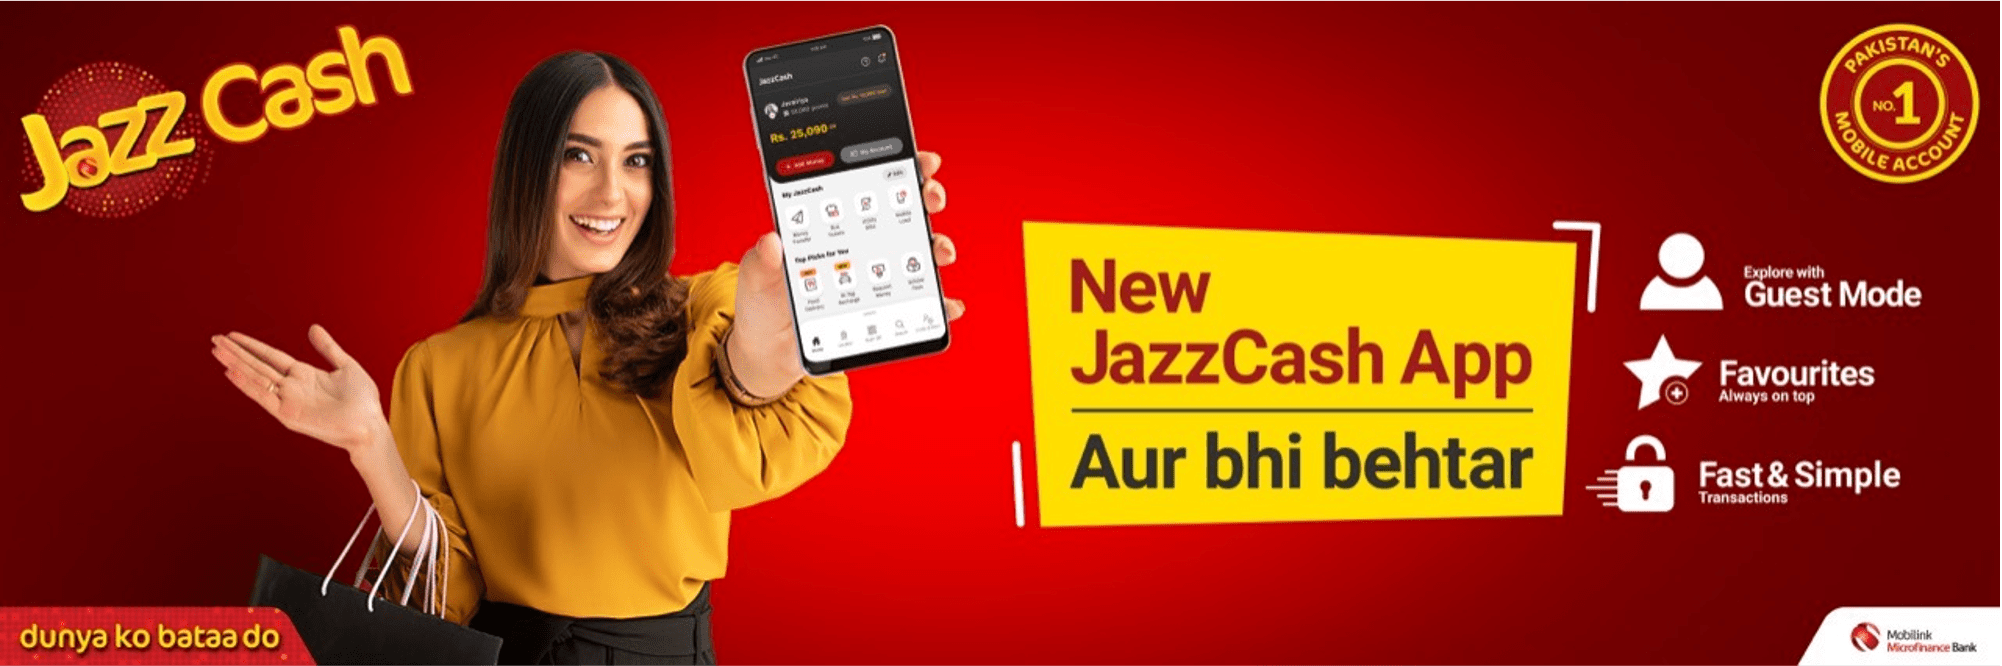 Jazz Cash rolls out an all new and improved mobile app